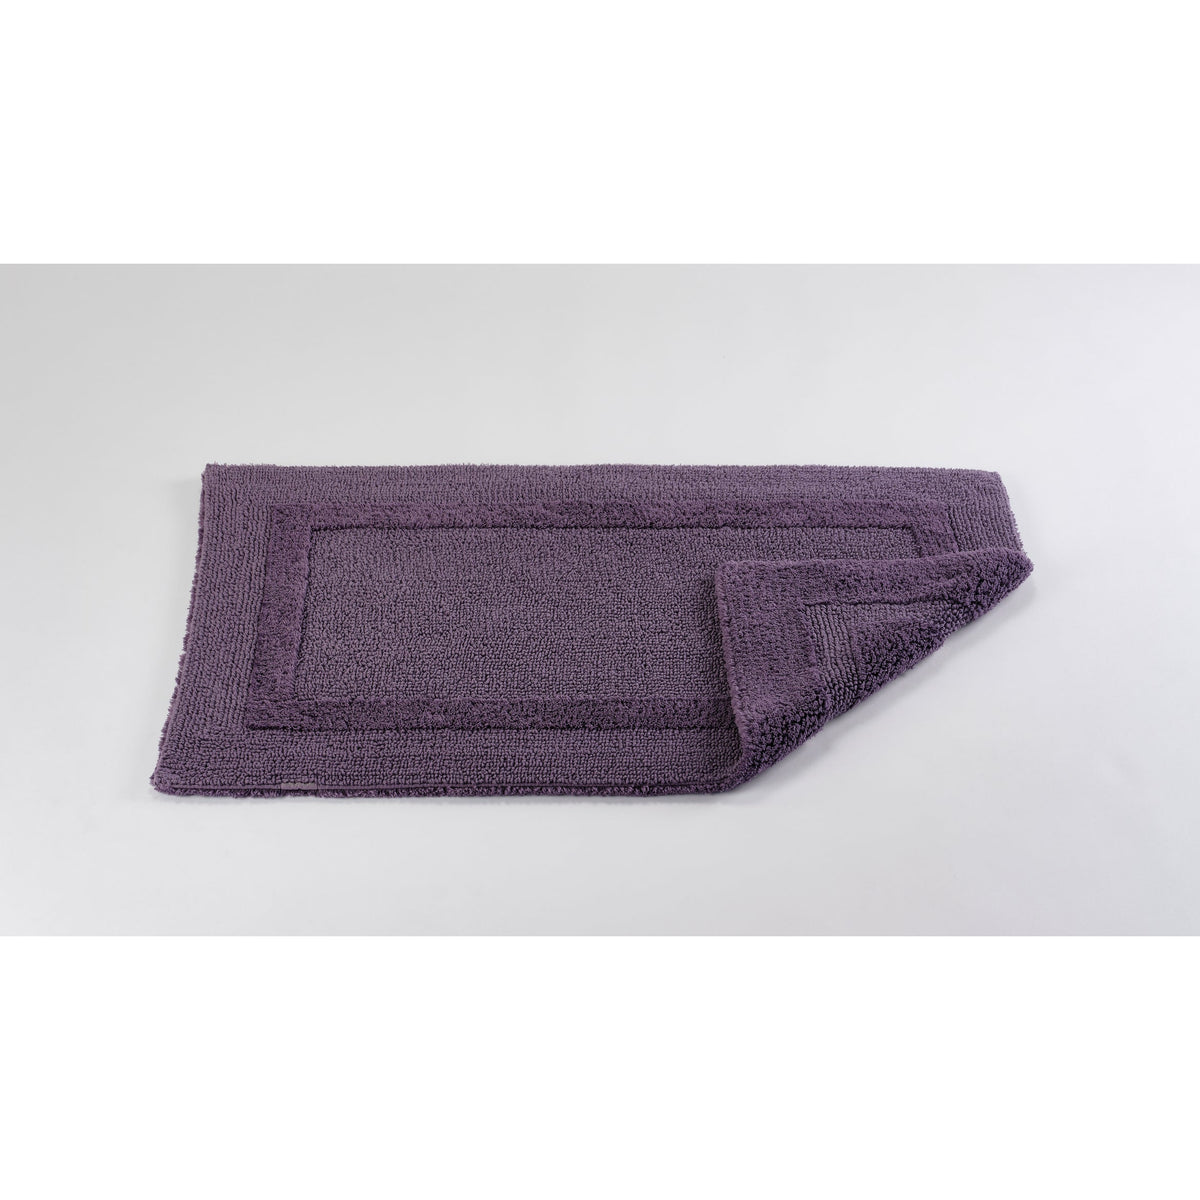  Abyss Habidecor Reversible Bath Rug Straight Figue Fine Linens